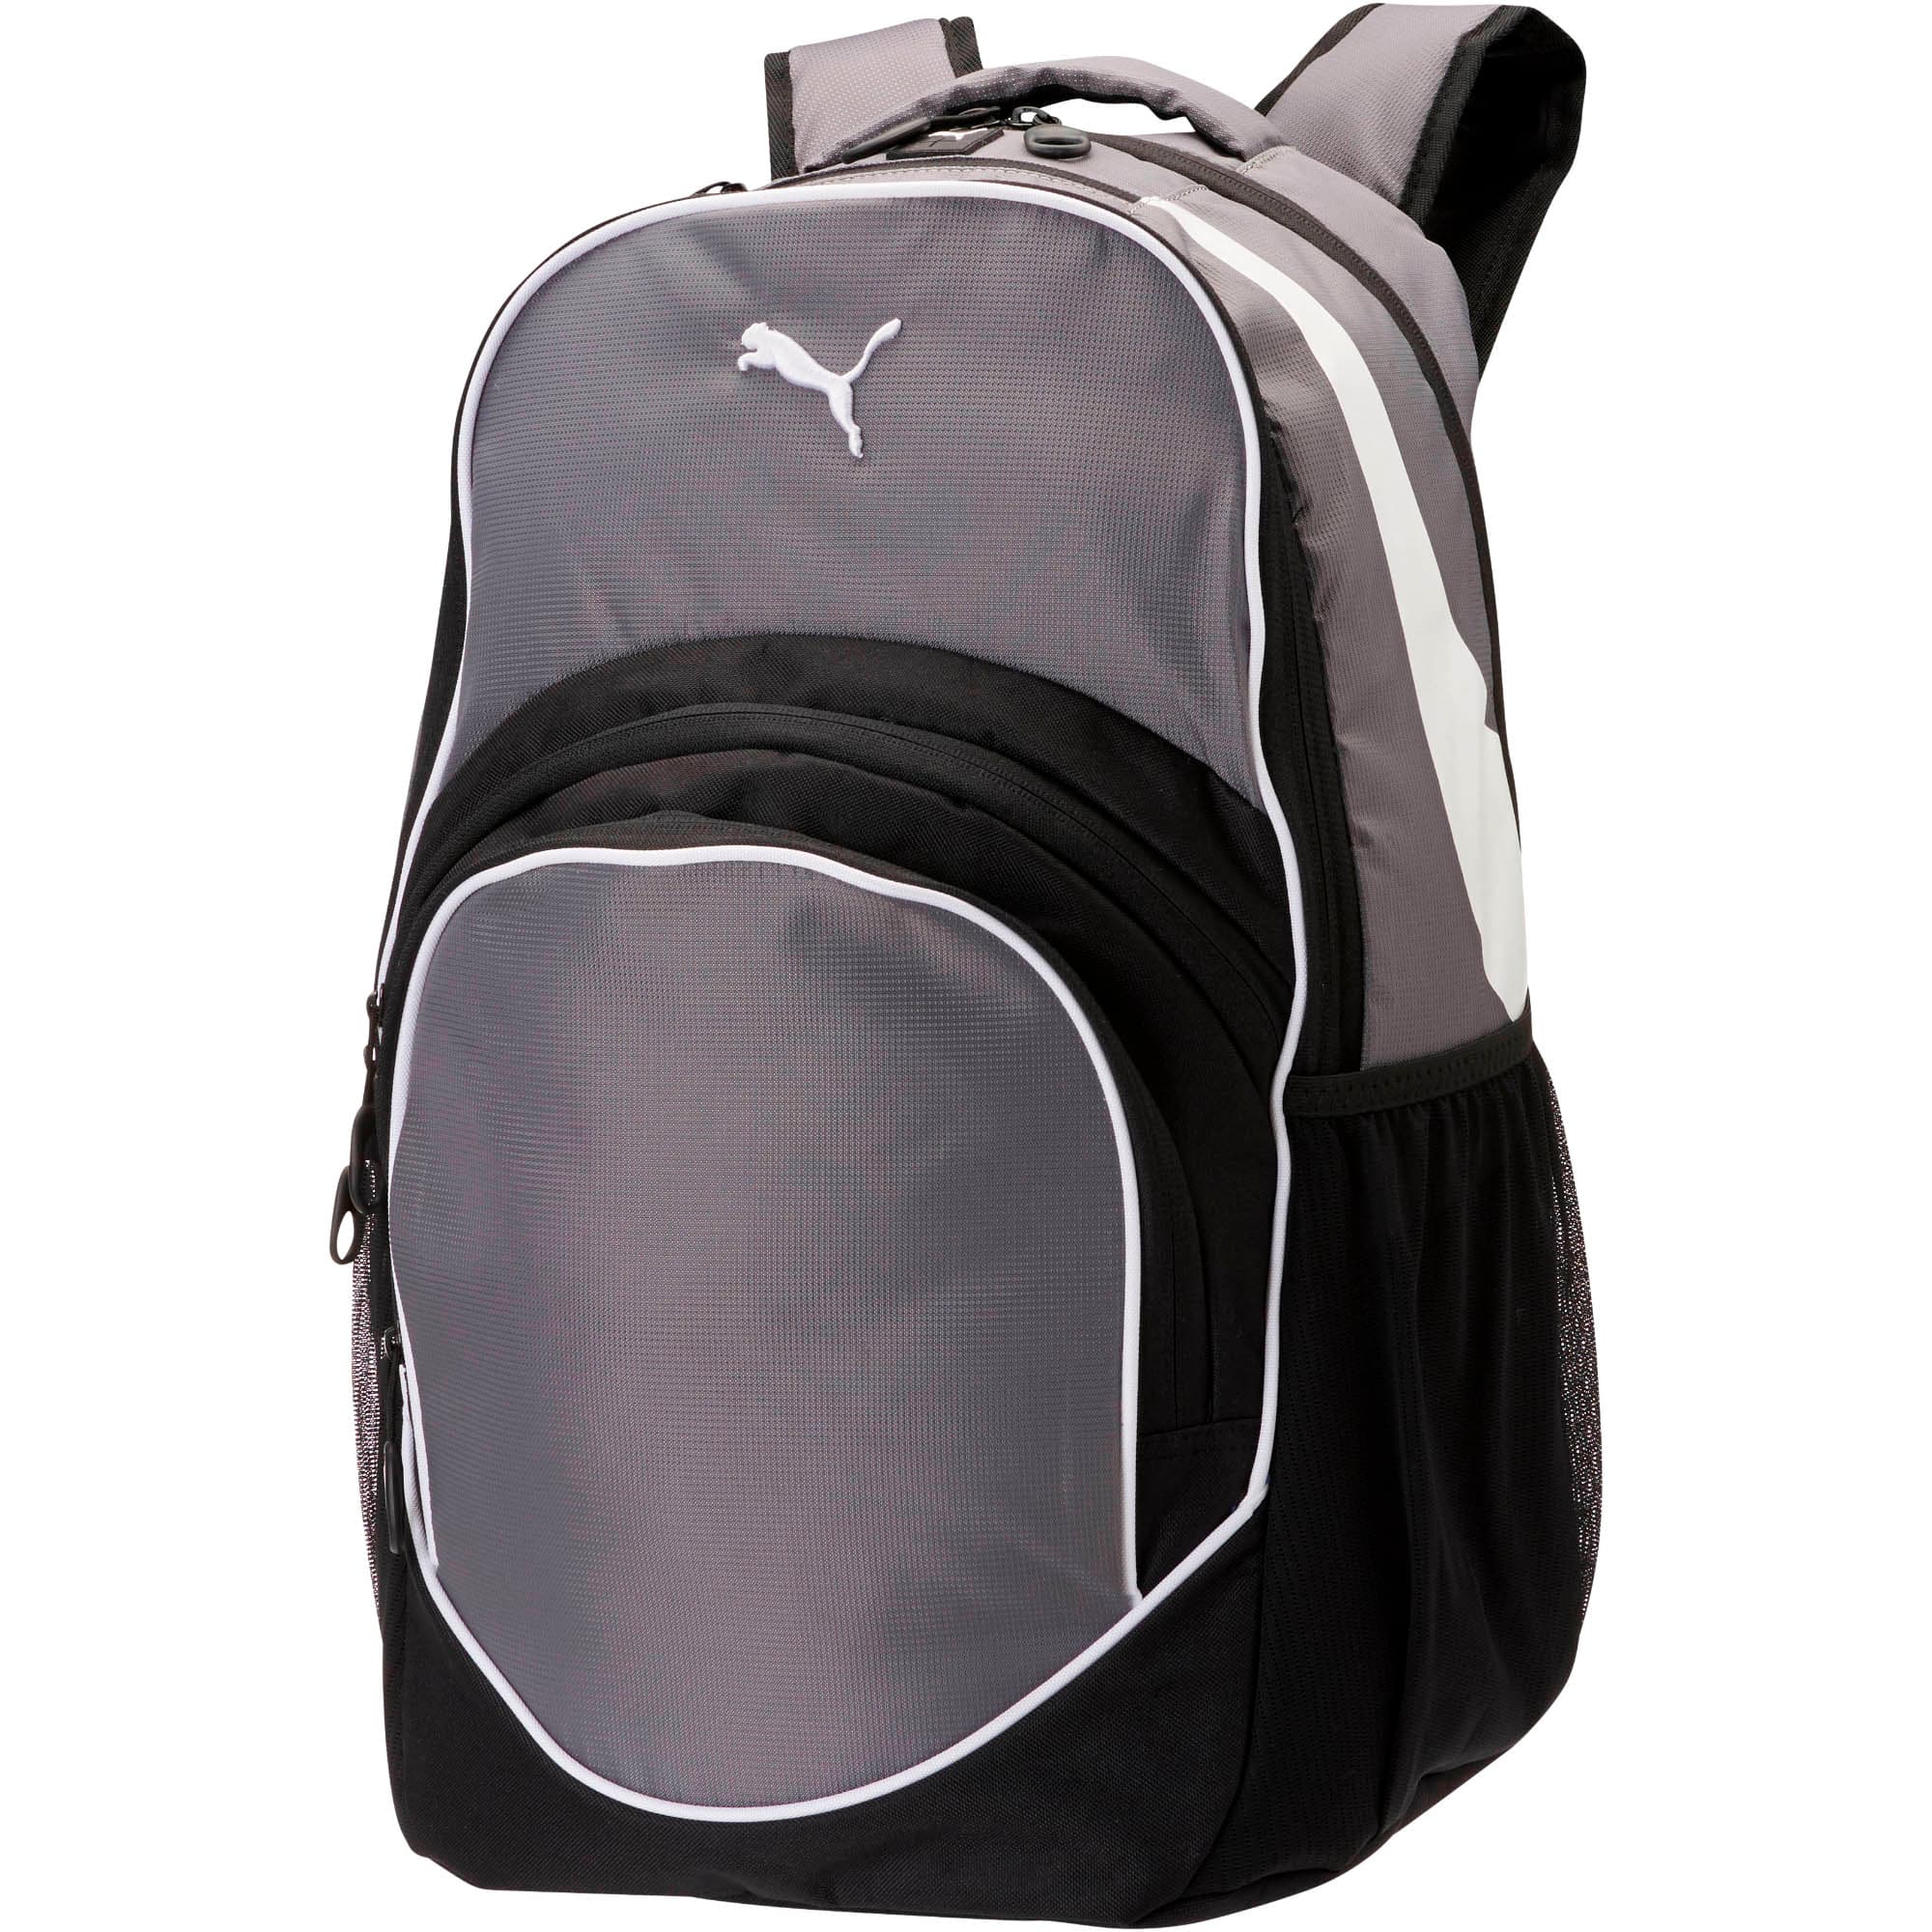 puma formation 2.0 ball backpack